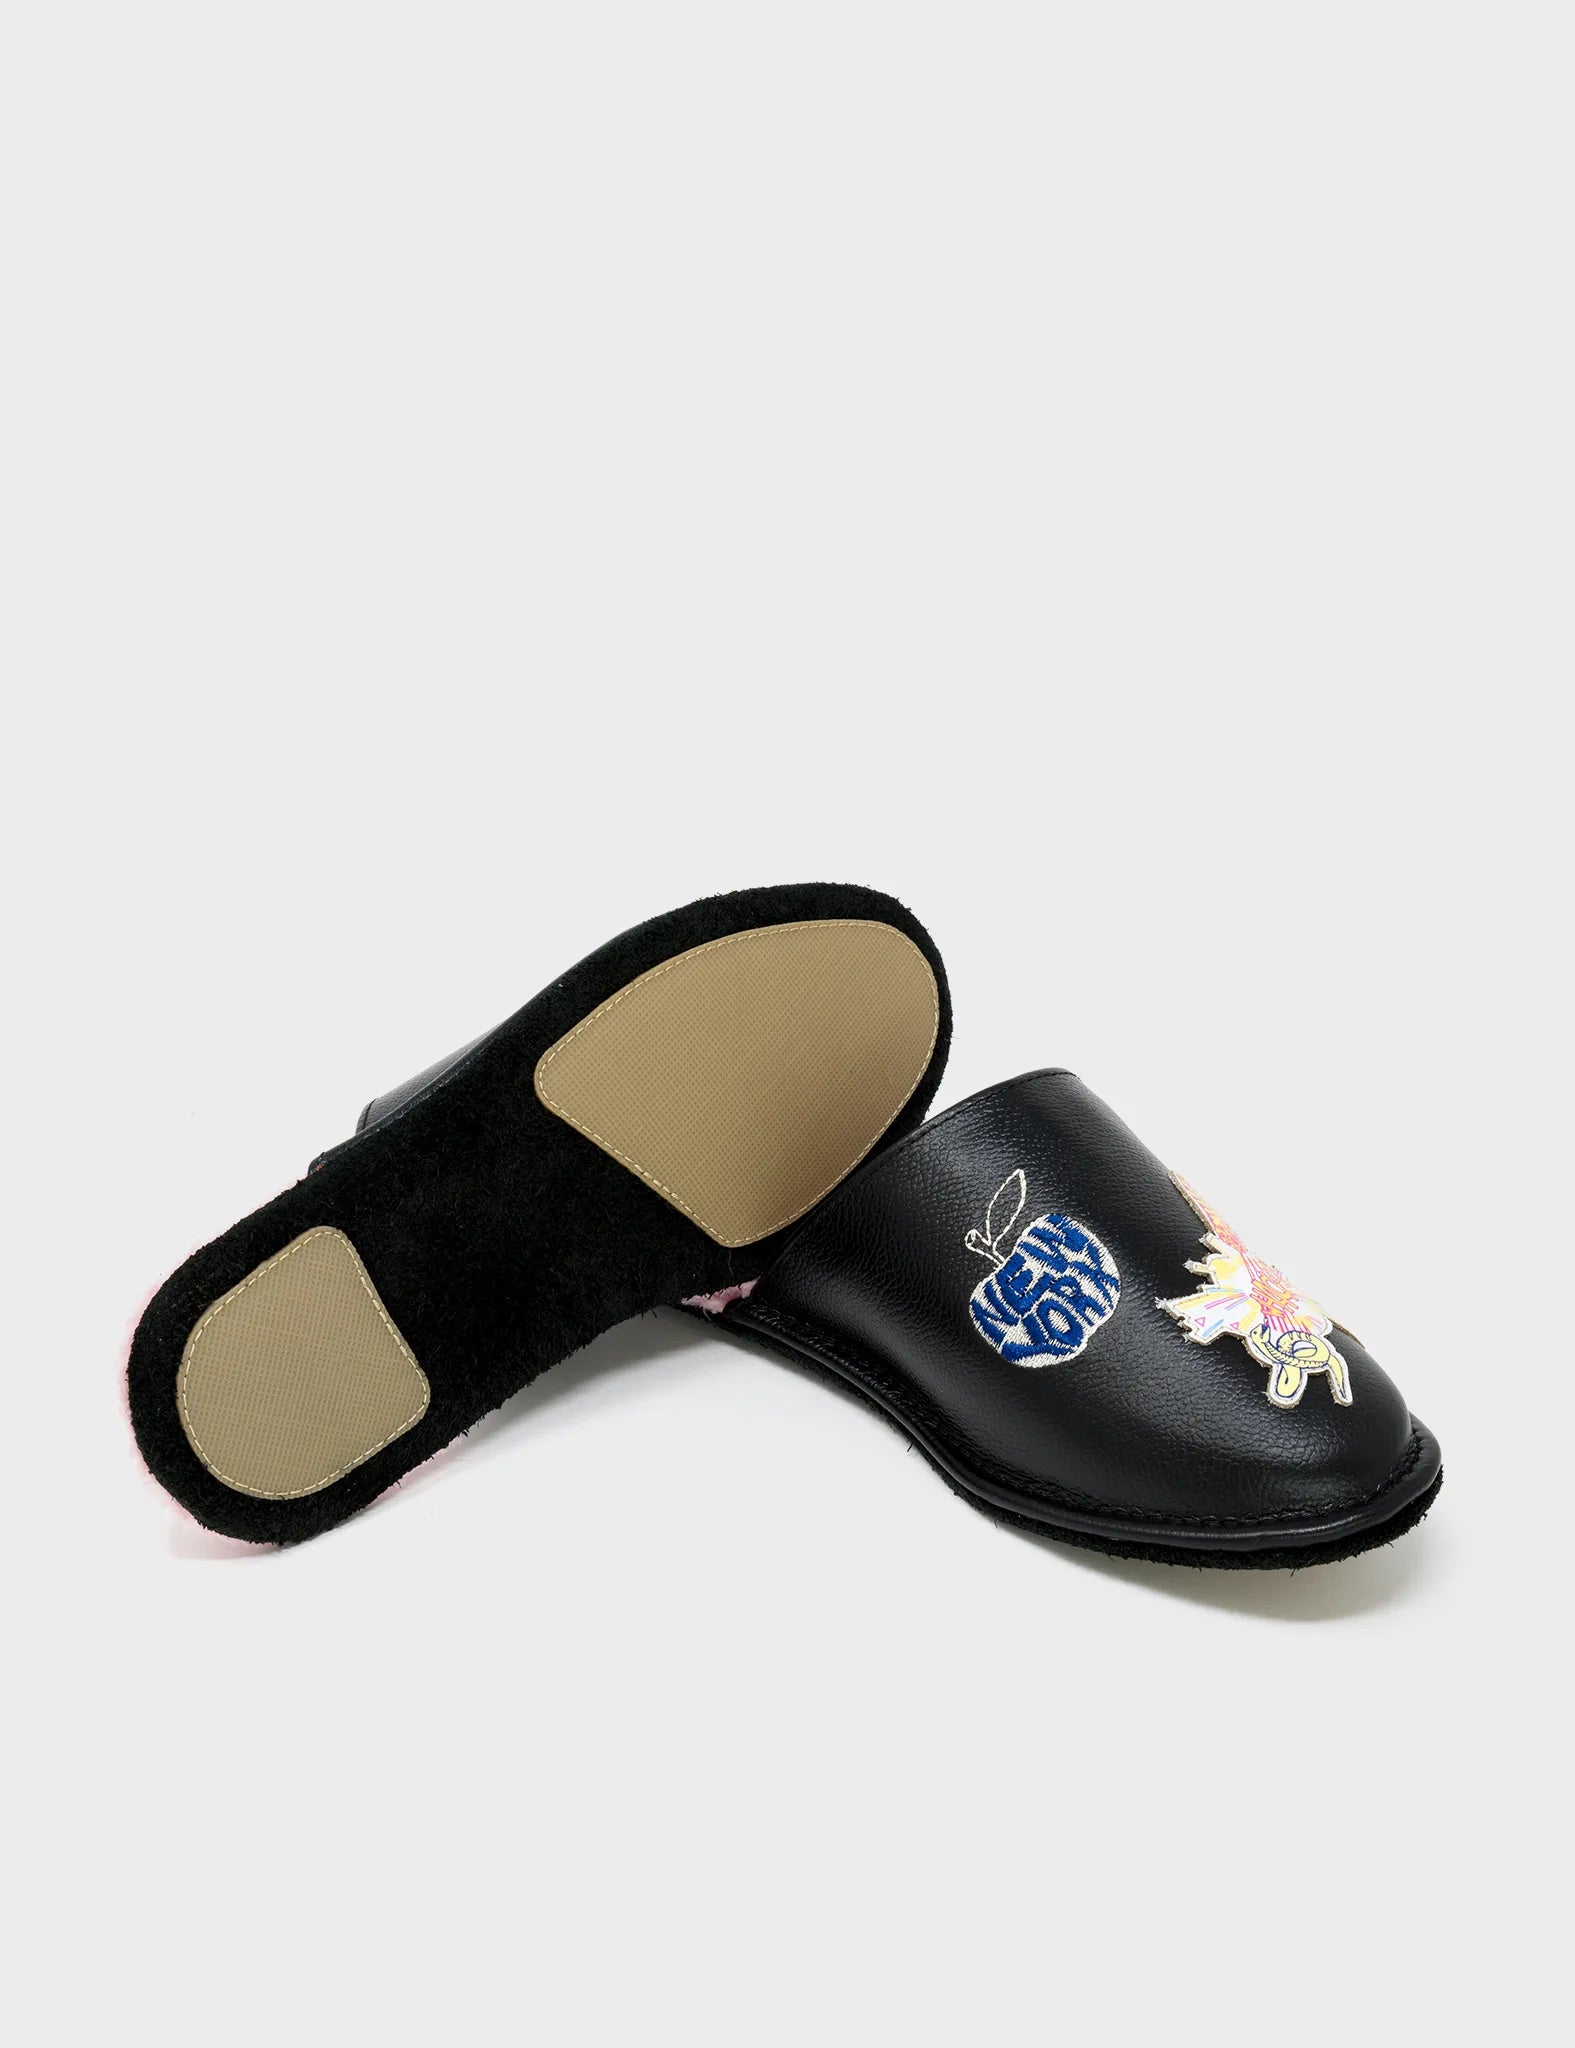  Black Leather Slippers - Tiger Power Embroidery - Bottom